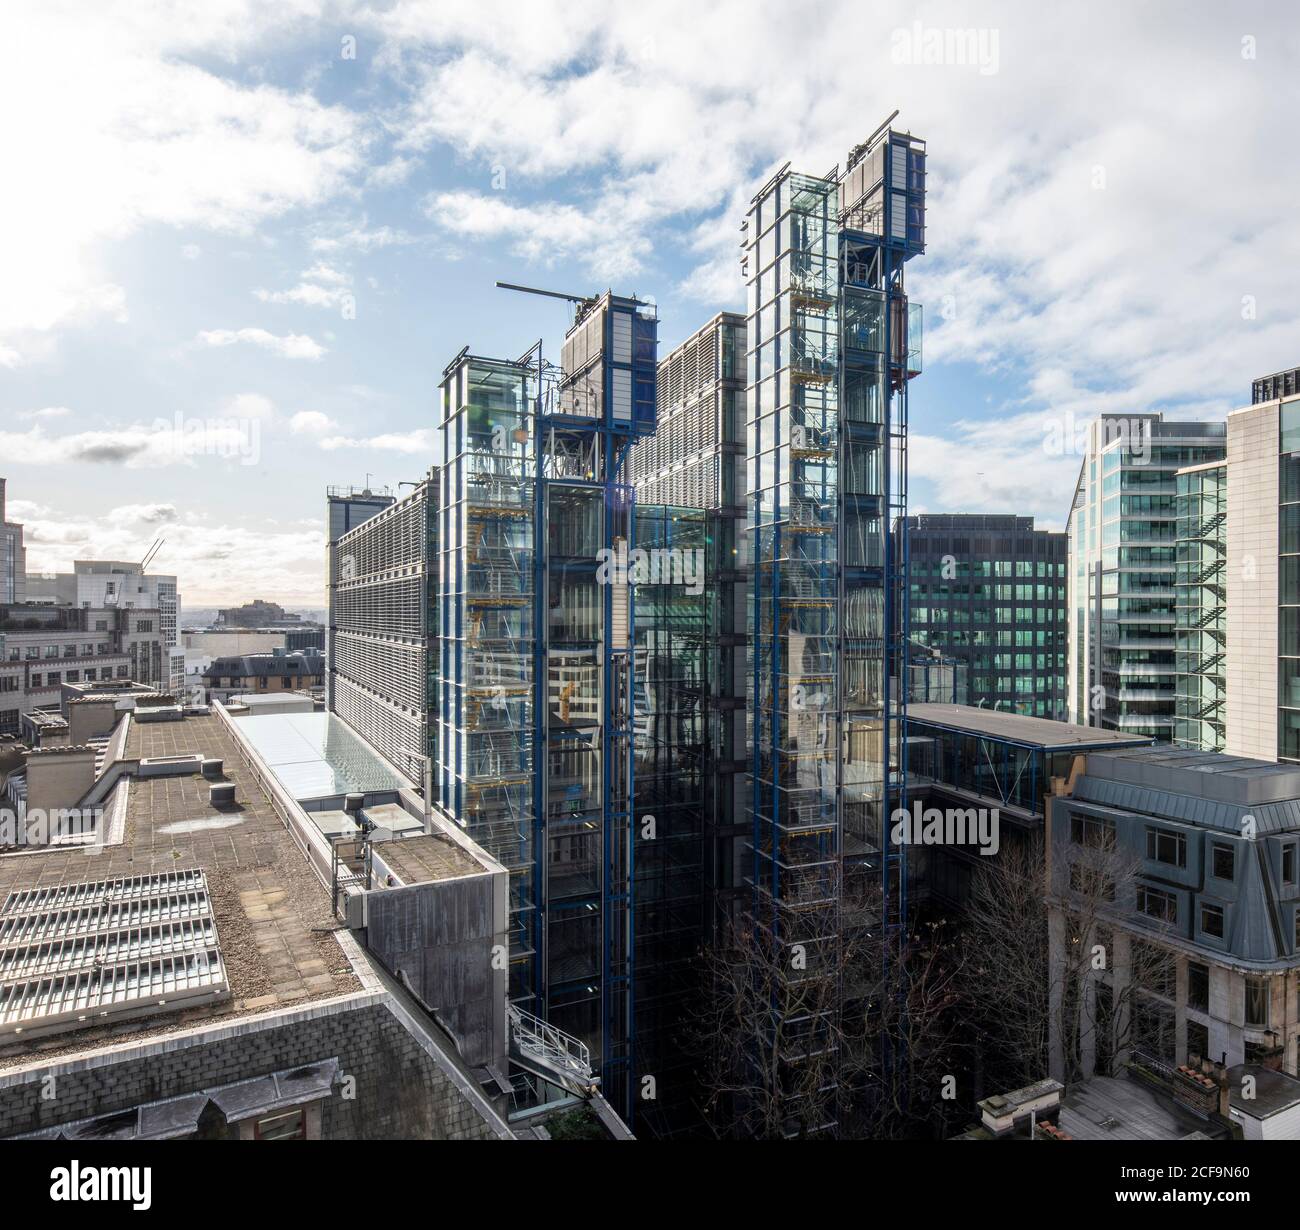 Elevated view of Rogers Stirk Harbour towers on LRS showing glazed elevator and stair cores. Lloyd's Register of Shipping, London, United Kingdom. Arc Stock Photo